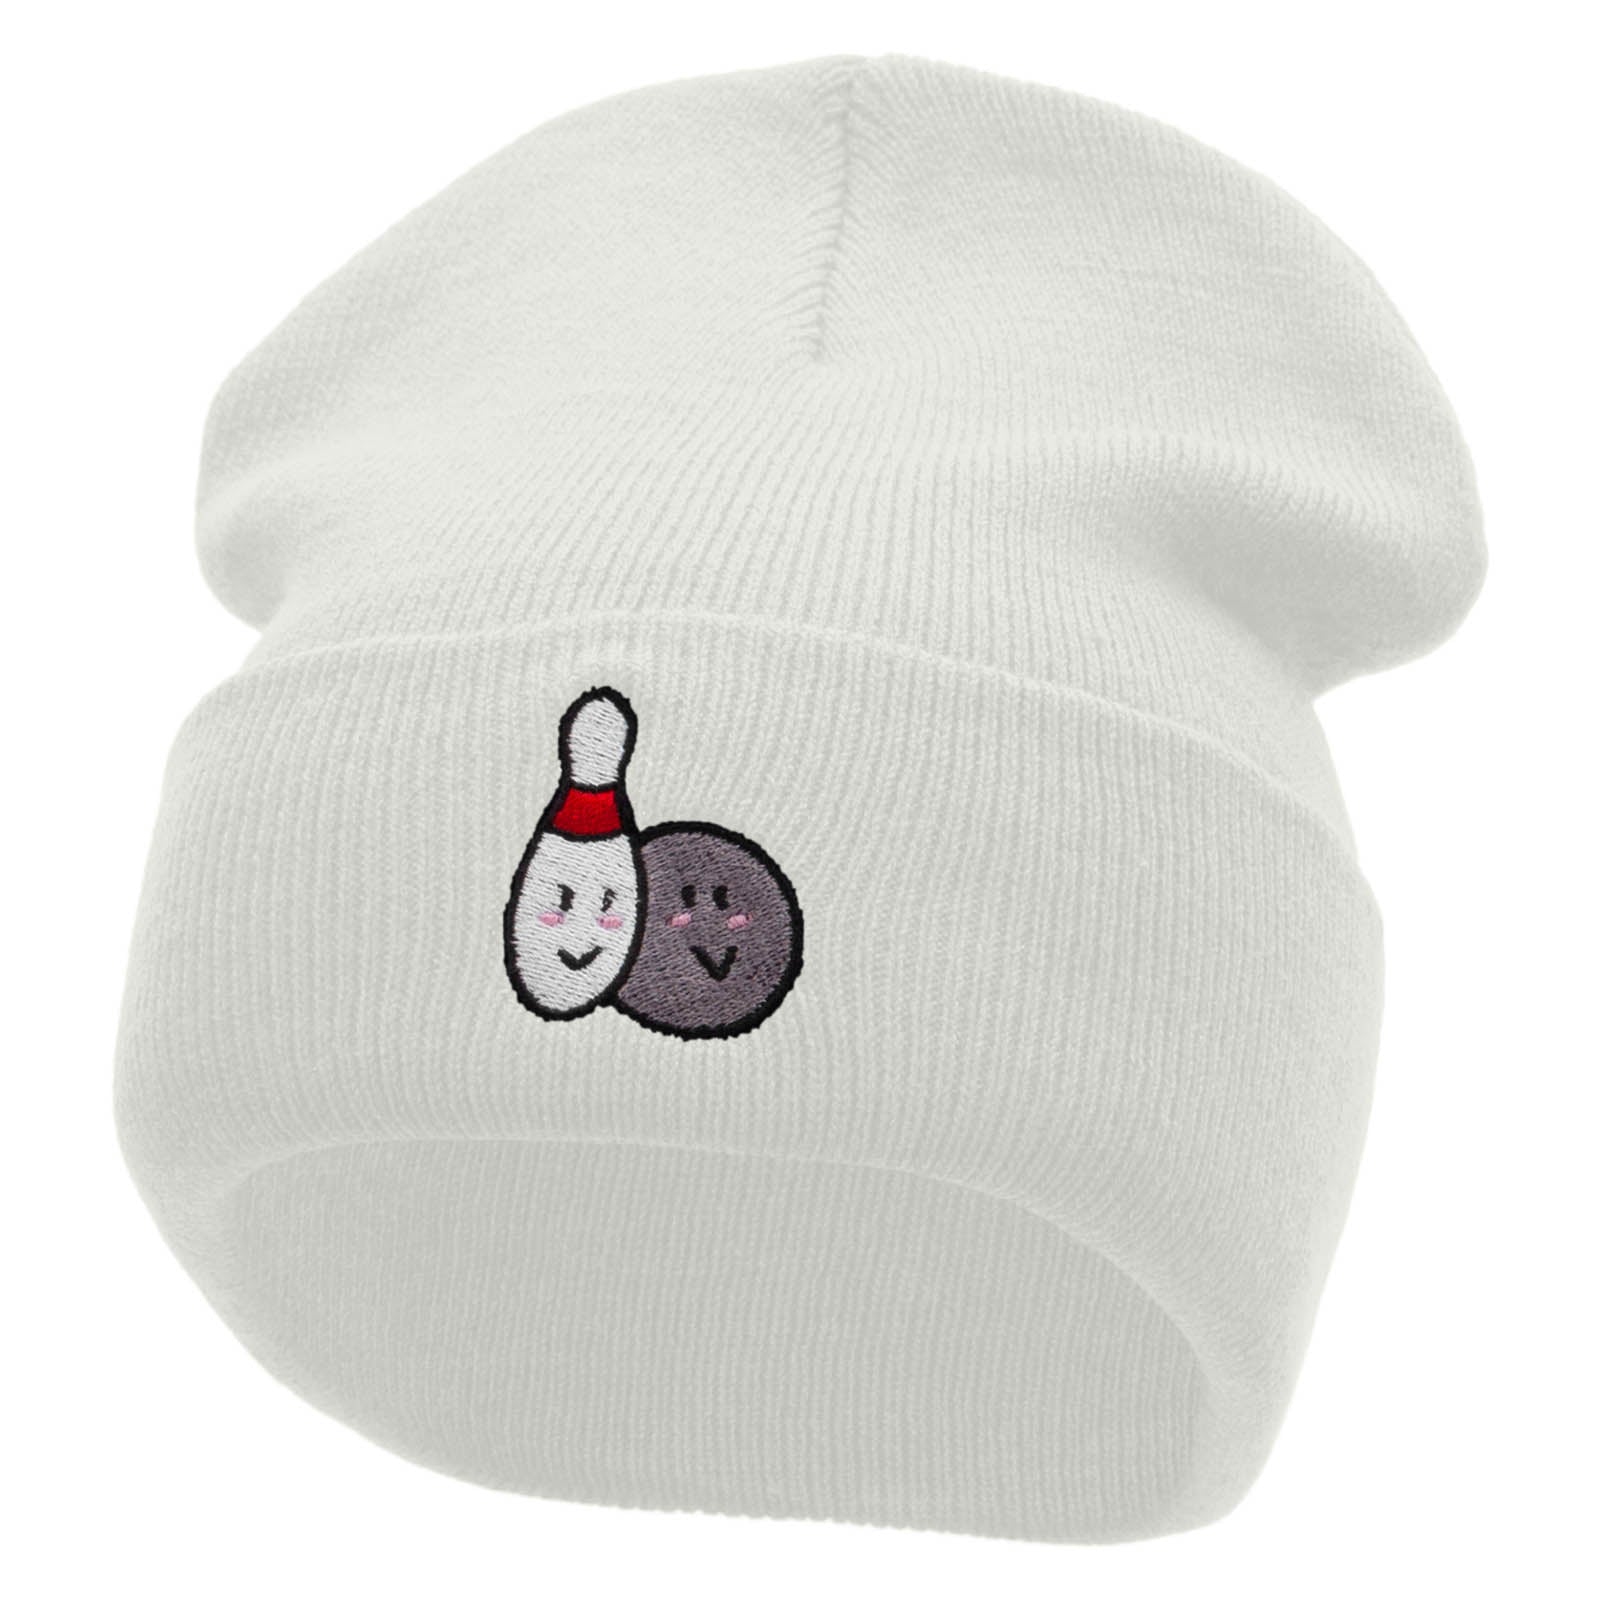 Bowling Smilies Embroidered 12 Inch Long Knitted Beanie - White OSFM